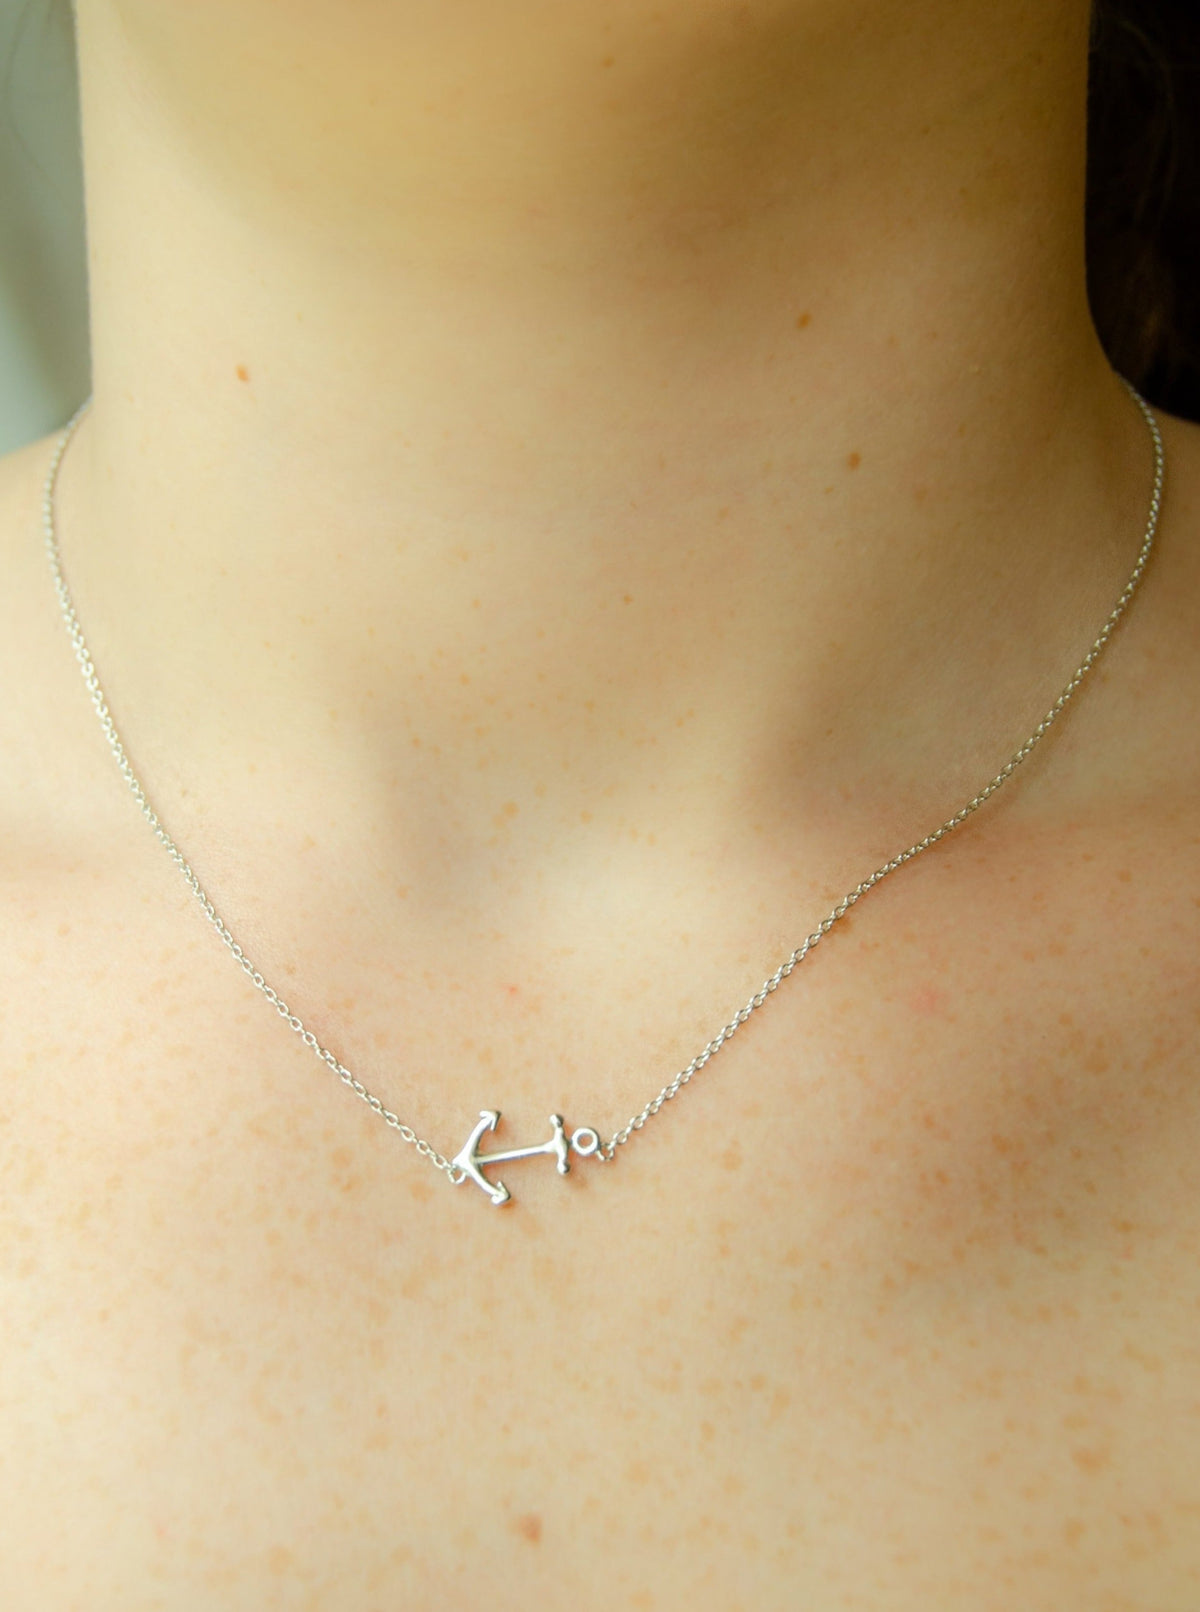 Anchor Charm Pendant on Sterling Silver 925 Delicate Chain 